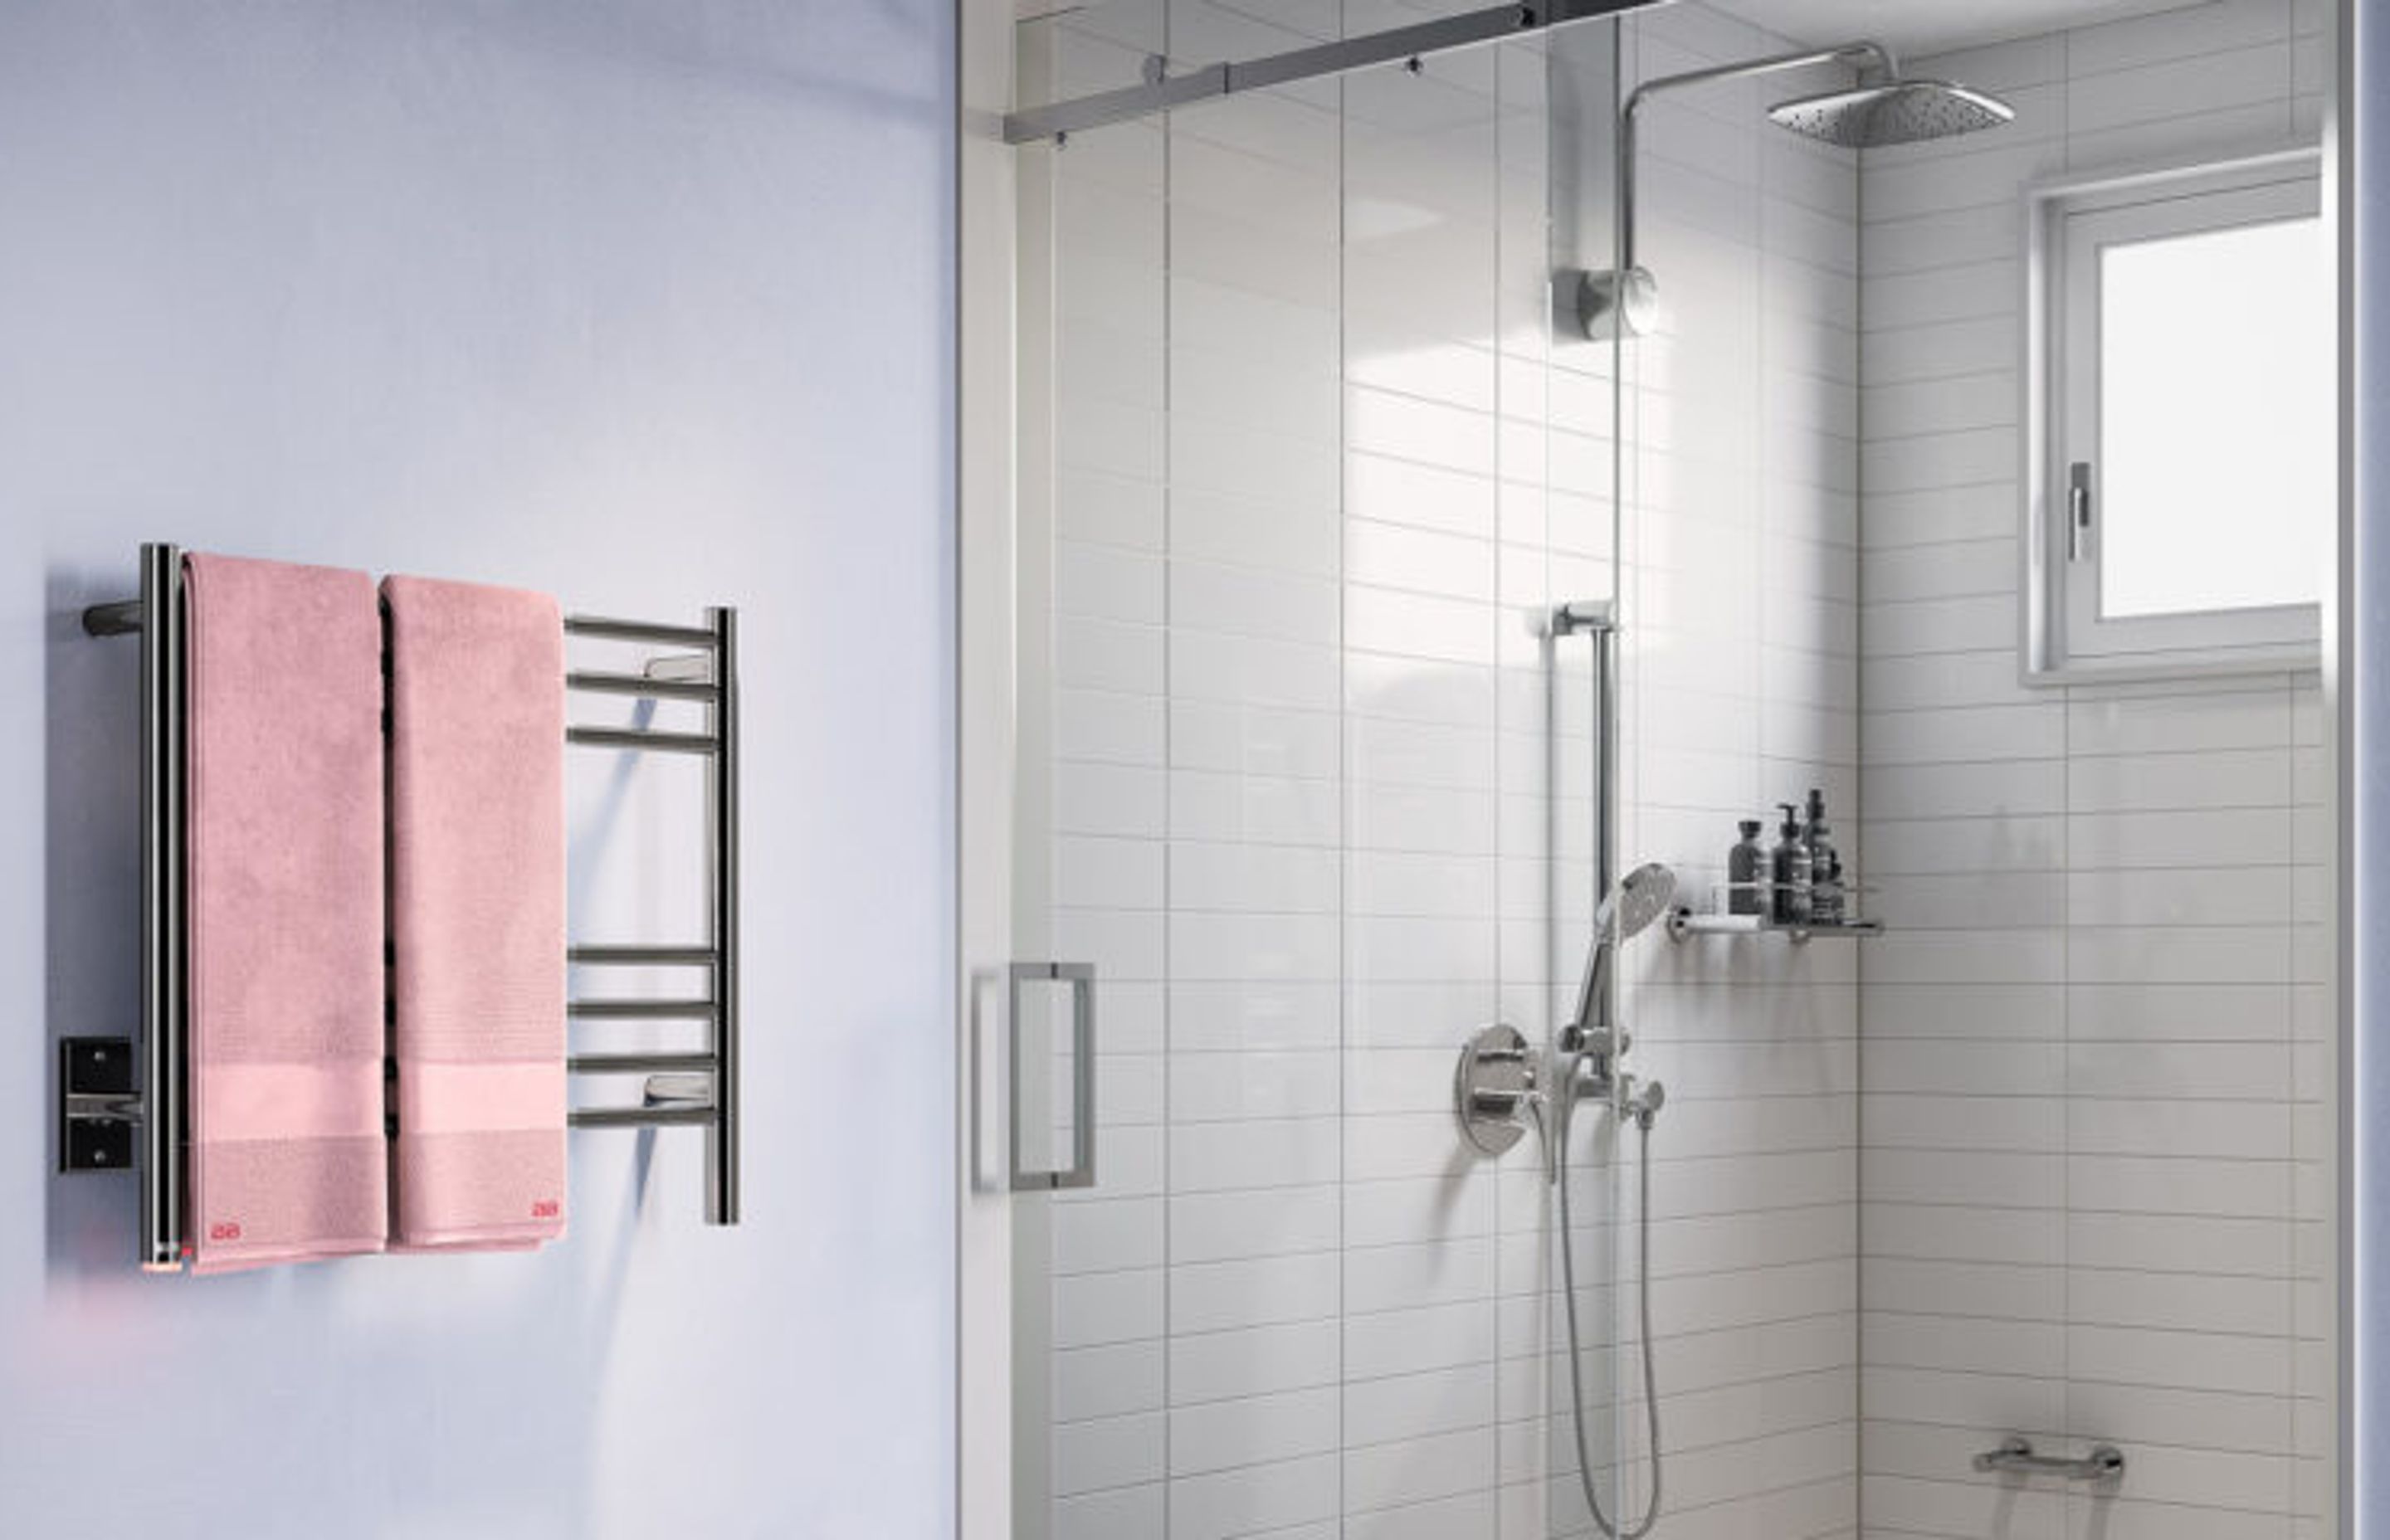 NATURAL 7 Bar 650mm heated towel rail with PTSelect Switch (US model shown here - square cover plate)